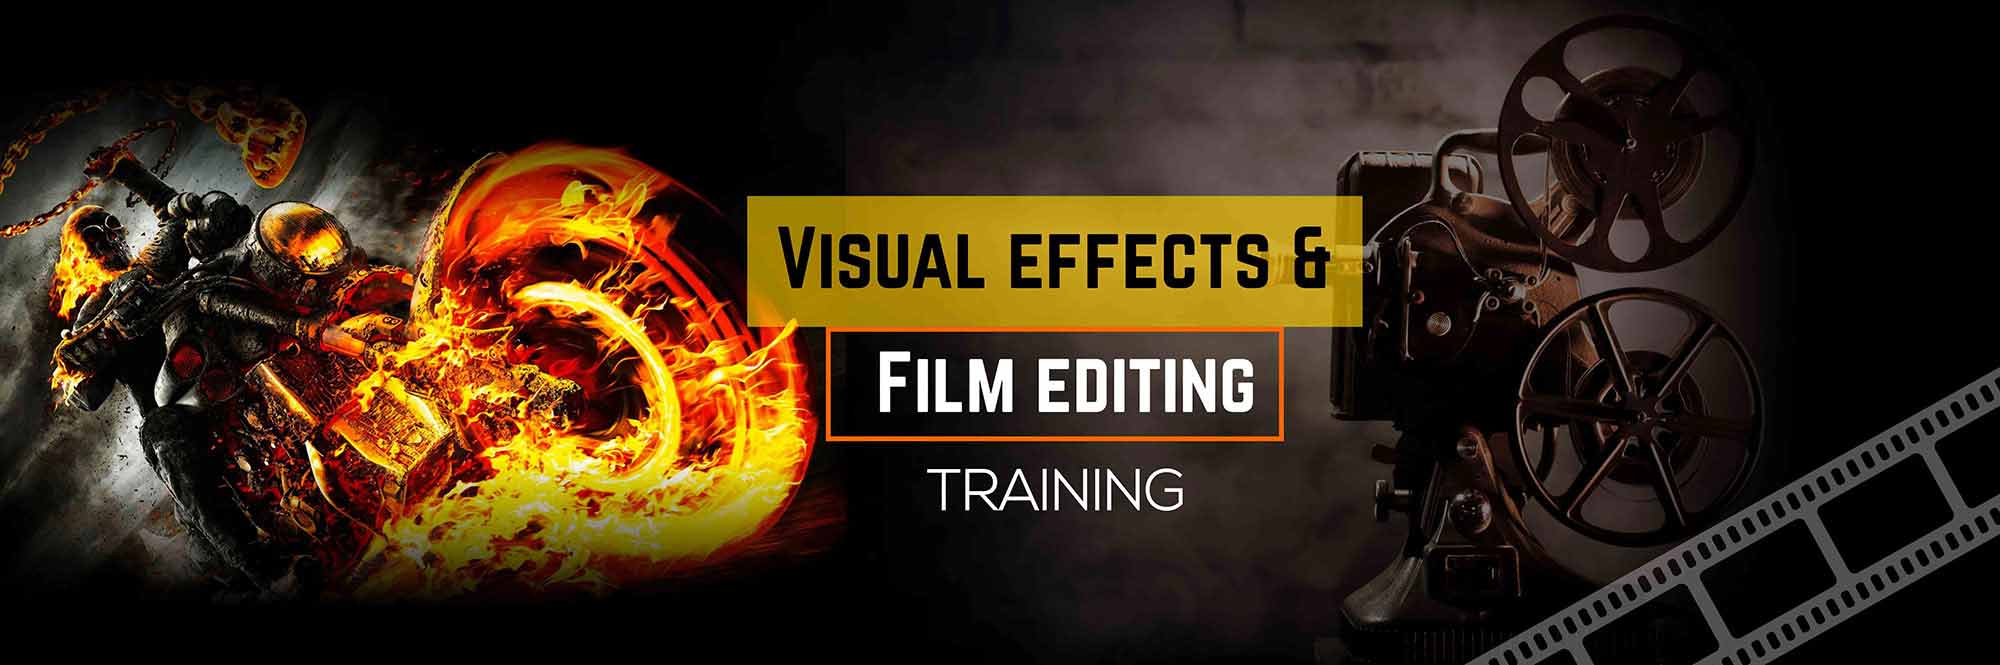 visual effects training in hyderabad